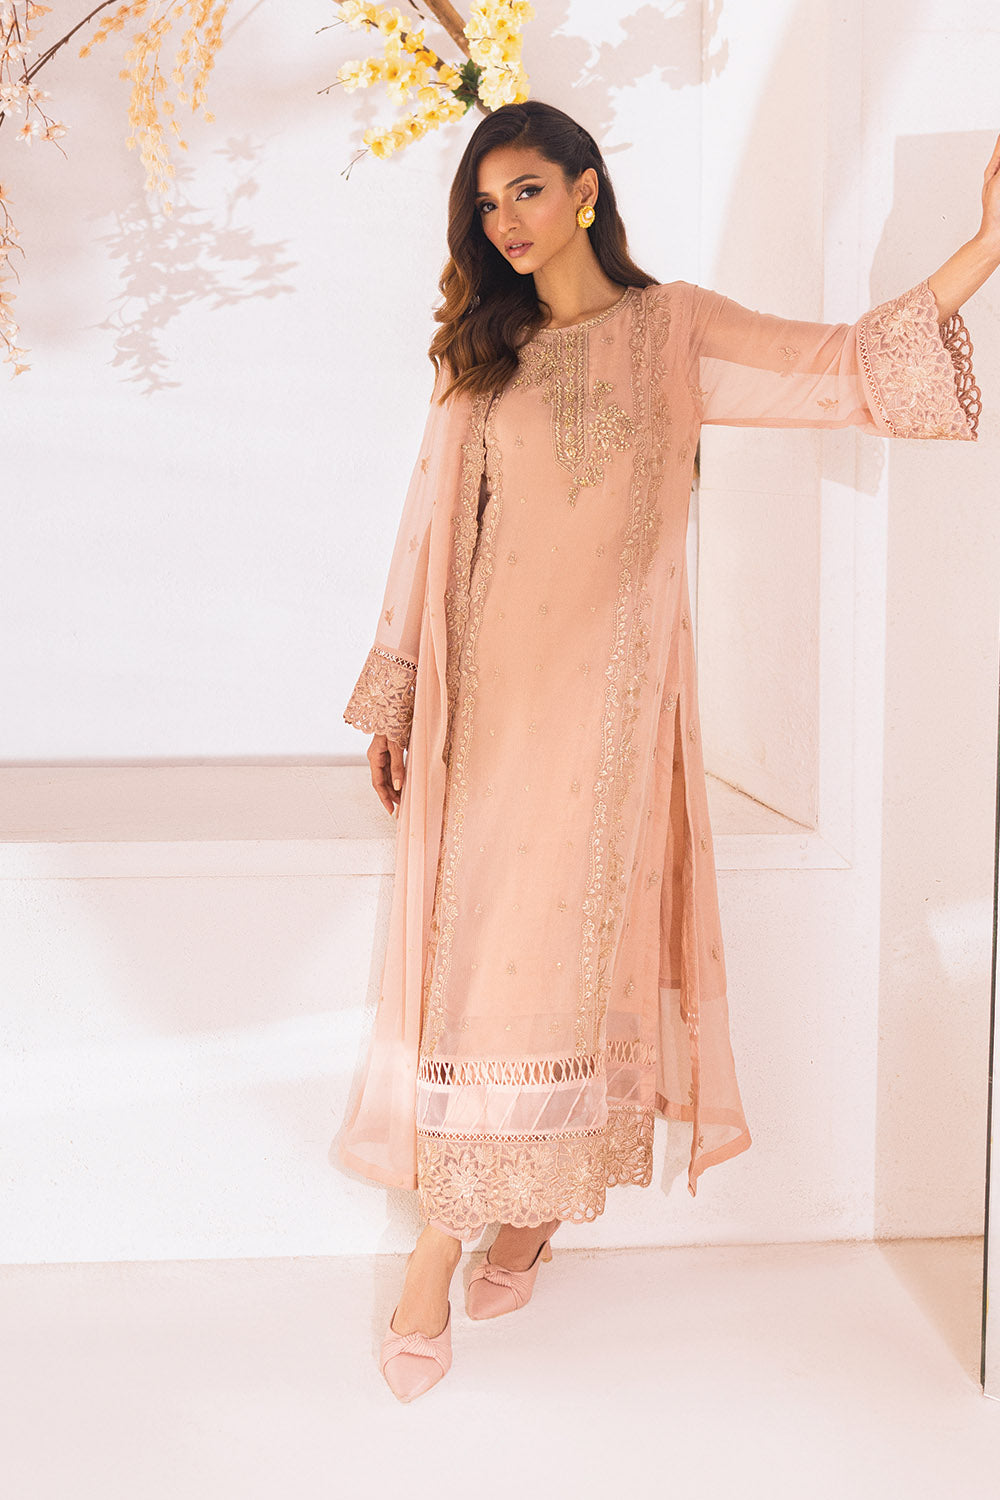 Azure Luxe Embroidered Suits Unstitched 4 Piece AZE23-106 Majestic Glow